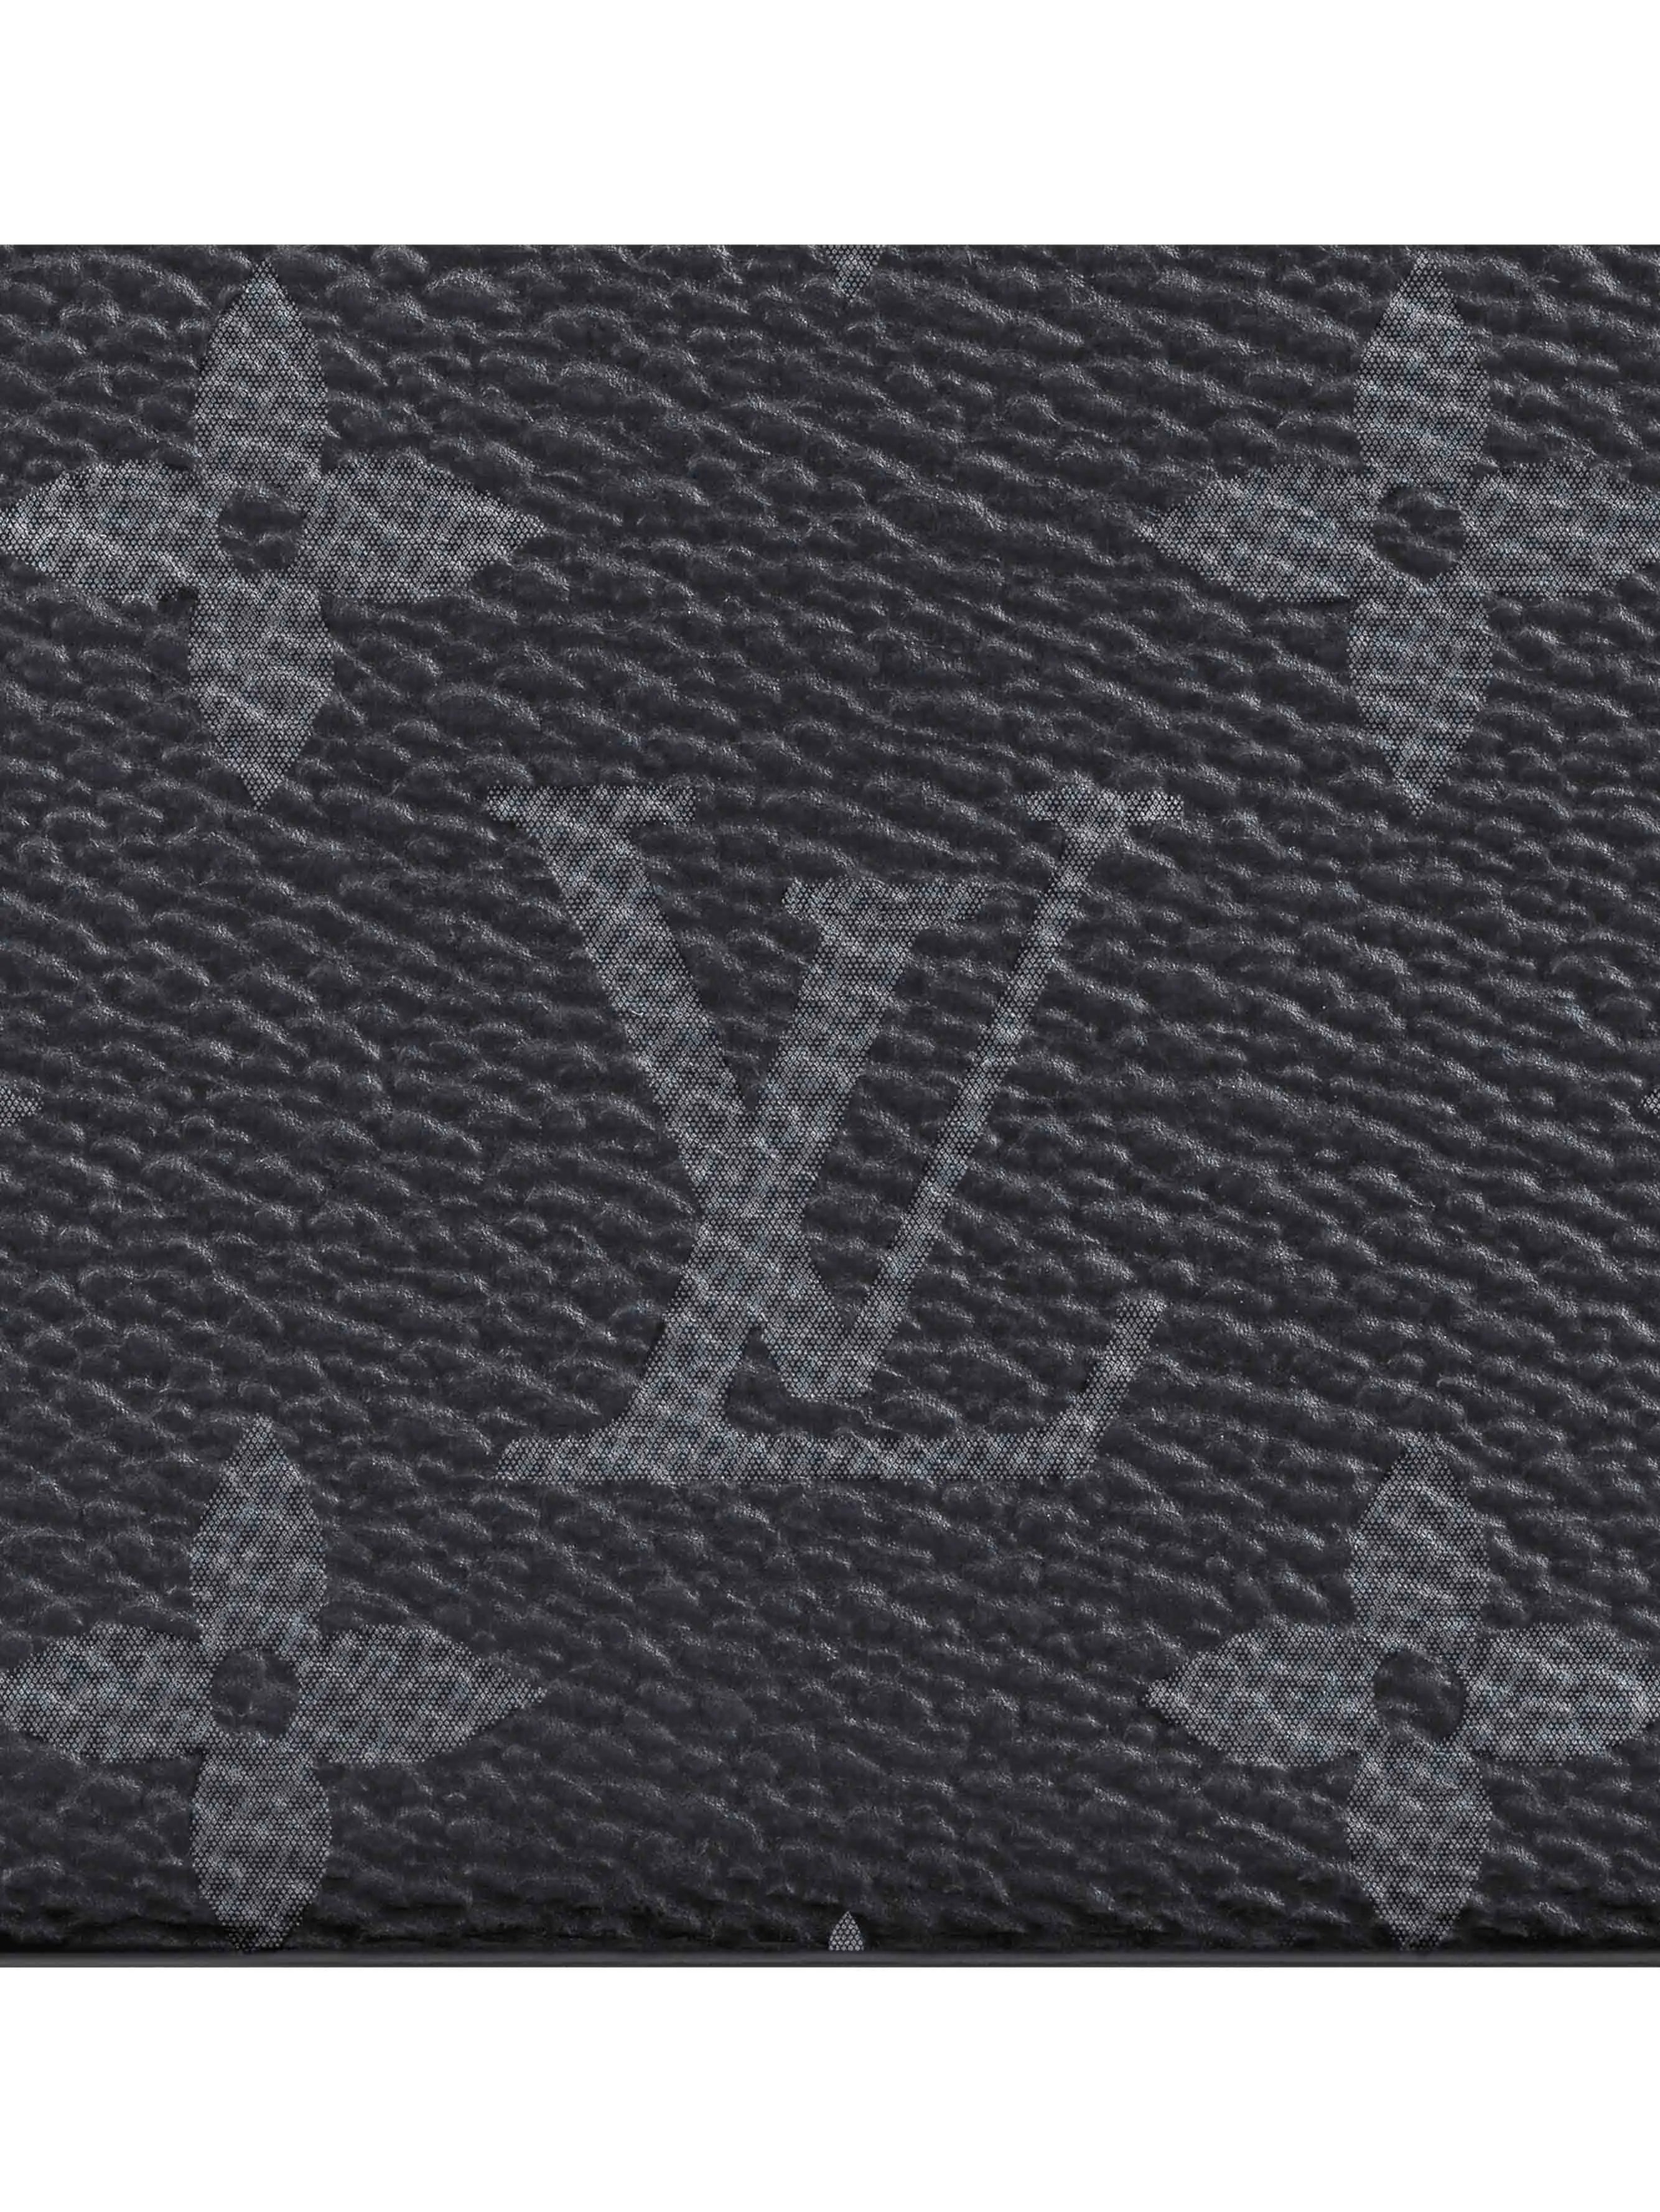 Louis Vuitton Soft Trunk Monogram Eclipse Black in Coated Canvas/Leather  with Matte Black